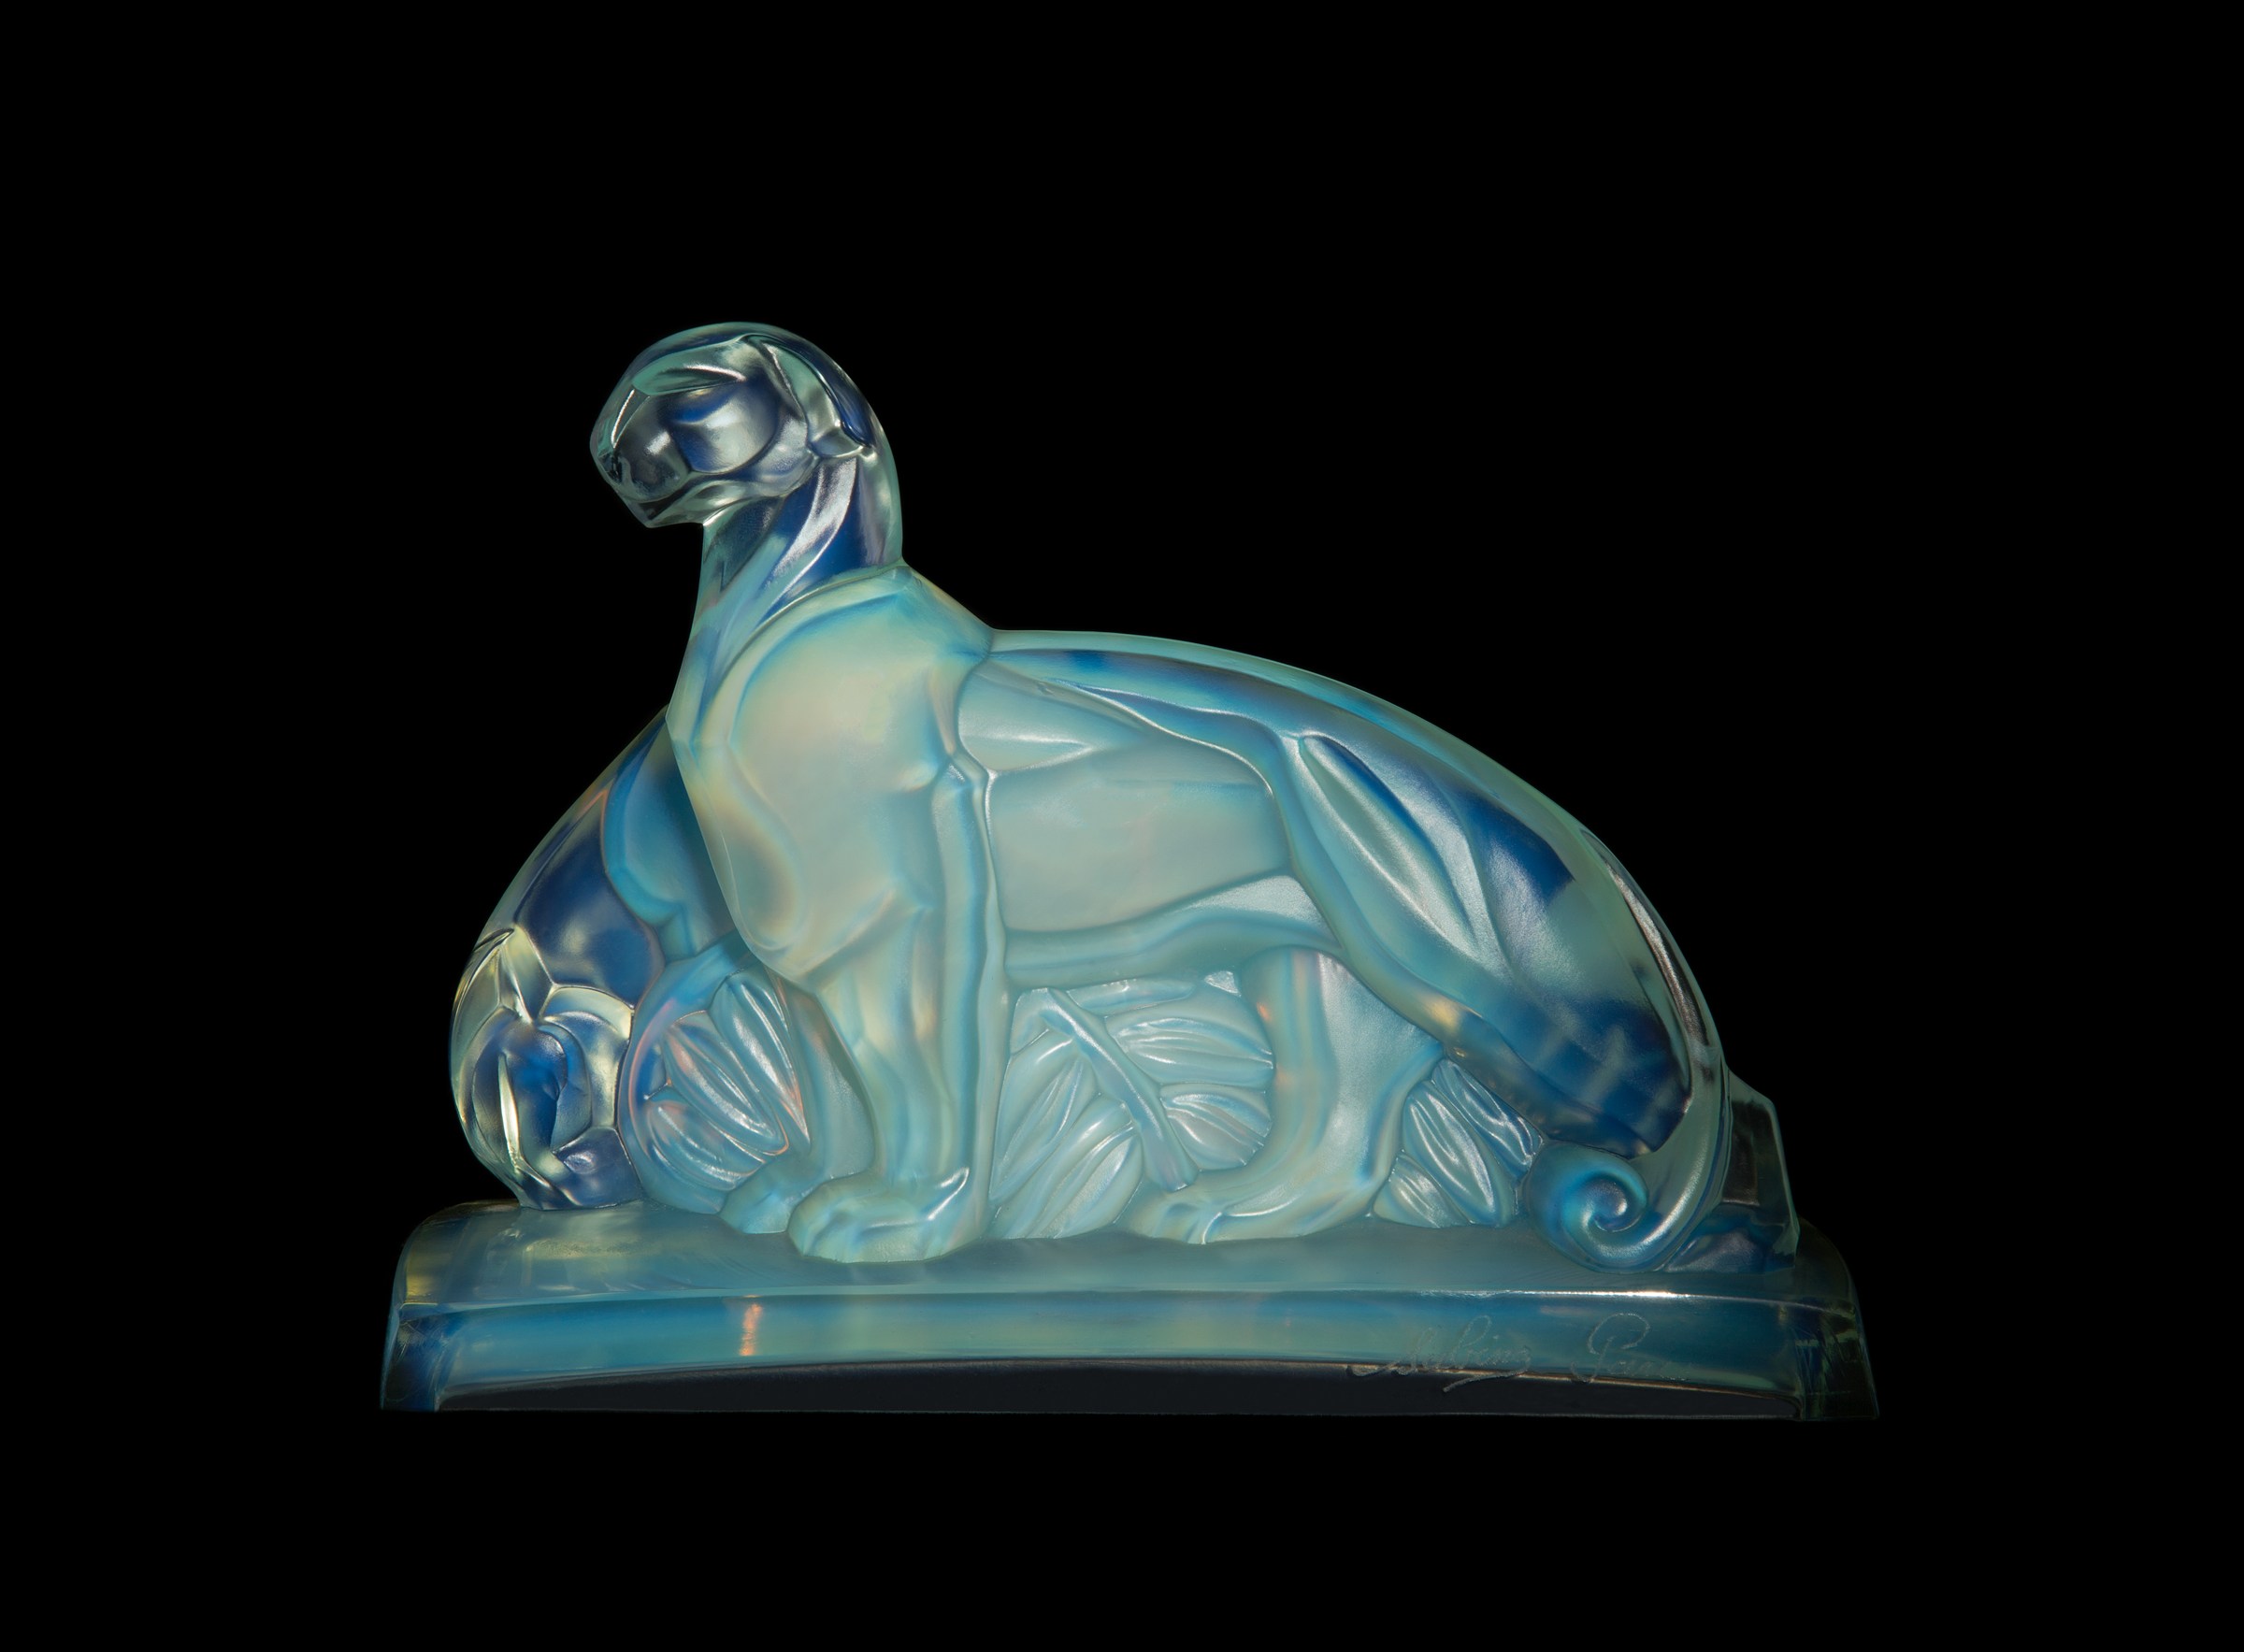  Marius-Ernest Sabino (French, 1878–1961).  Groupe de Pantheres (Group of Panthers),  circa 1928-1938. Press-molded opal glass; 5 3/4 x 8 x 3 in. Collection of David Huchthausen. Photo by Llyod Shugart. 